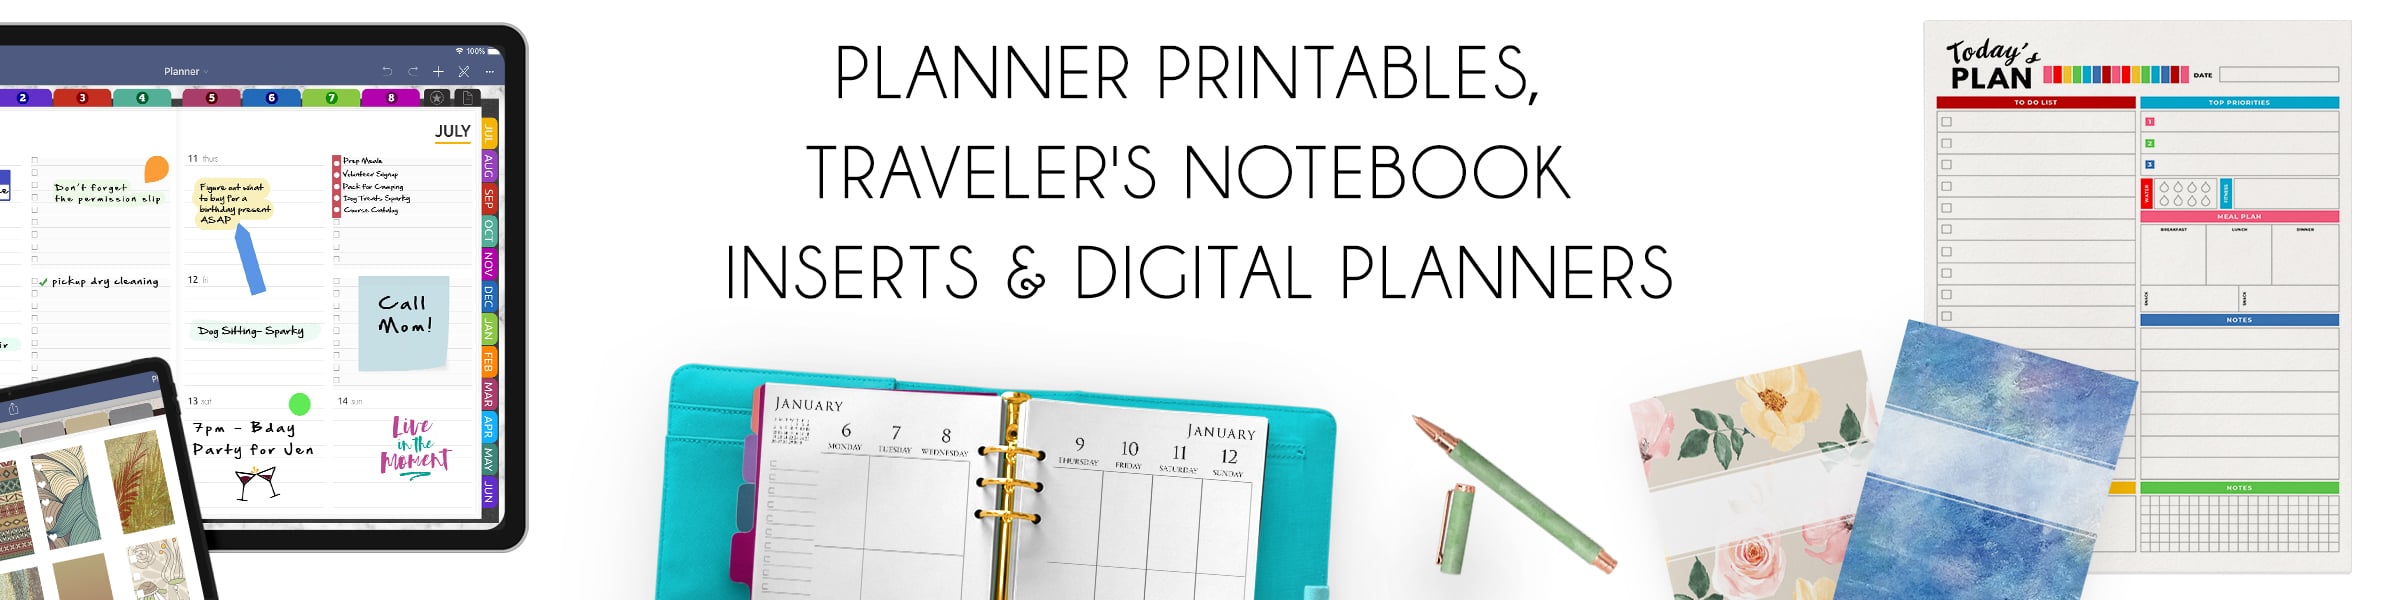 enchanted willow digital planners & printables